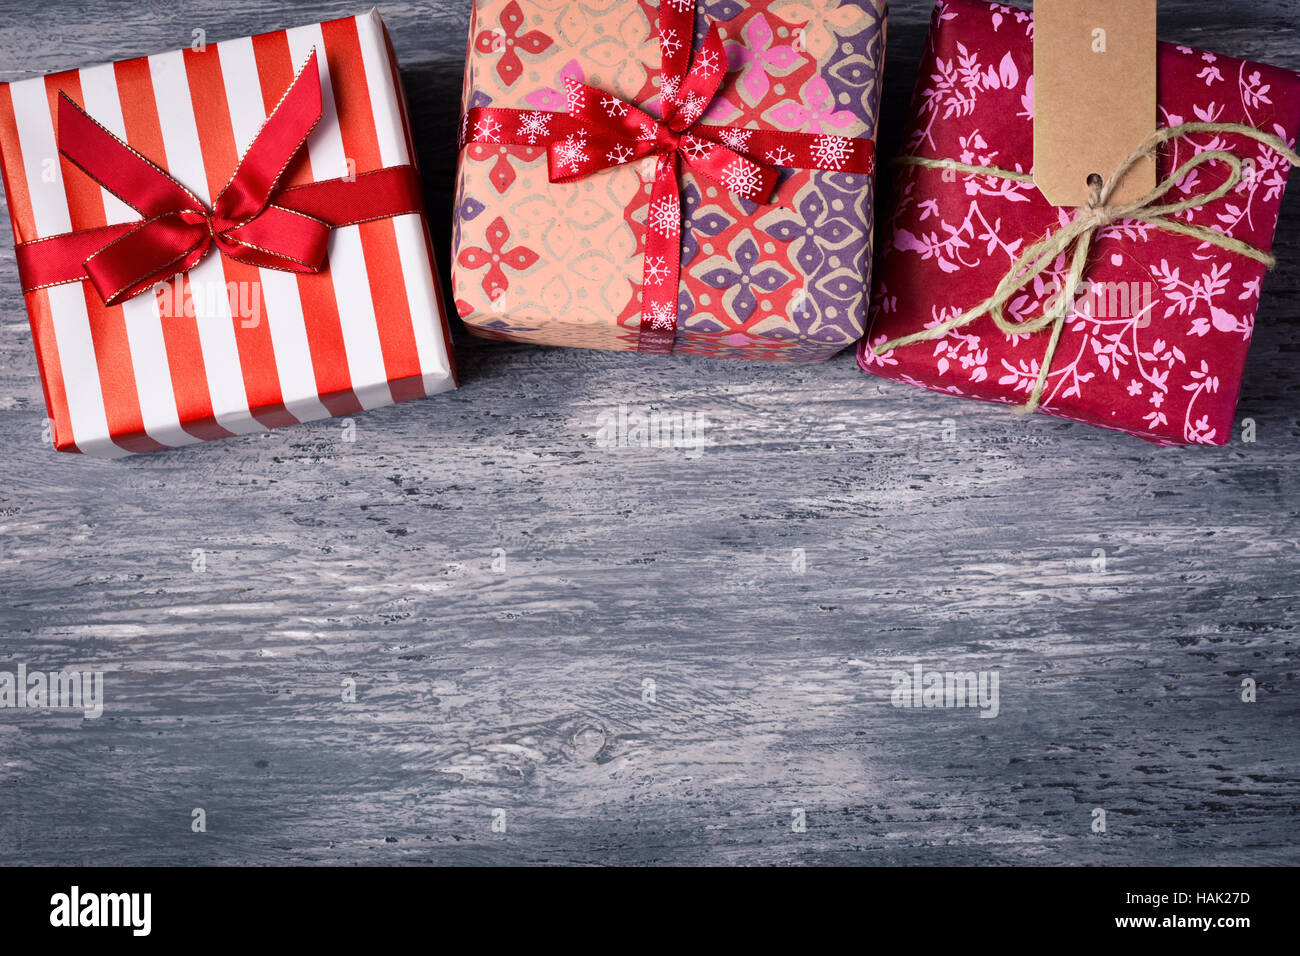 high-angle shot of some cozy gifts wrapped in different nice papers and tied with ribbons and strings of different colors on a rustic wooden surface, Stock Photo